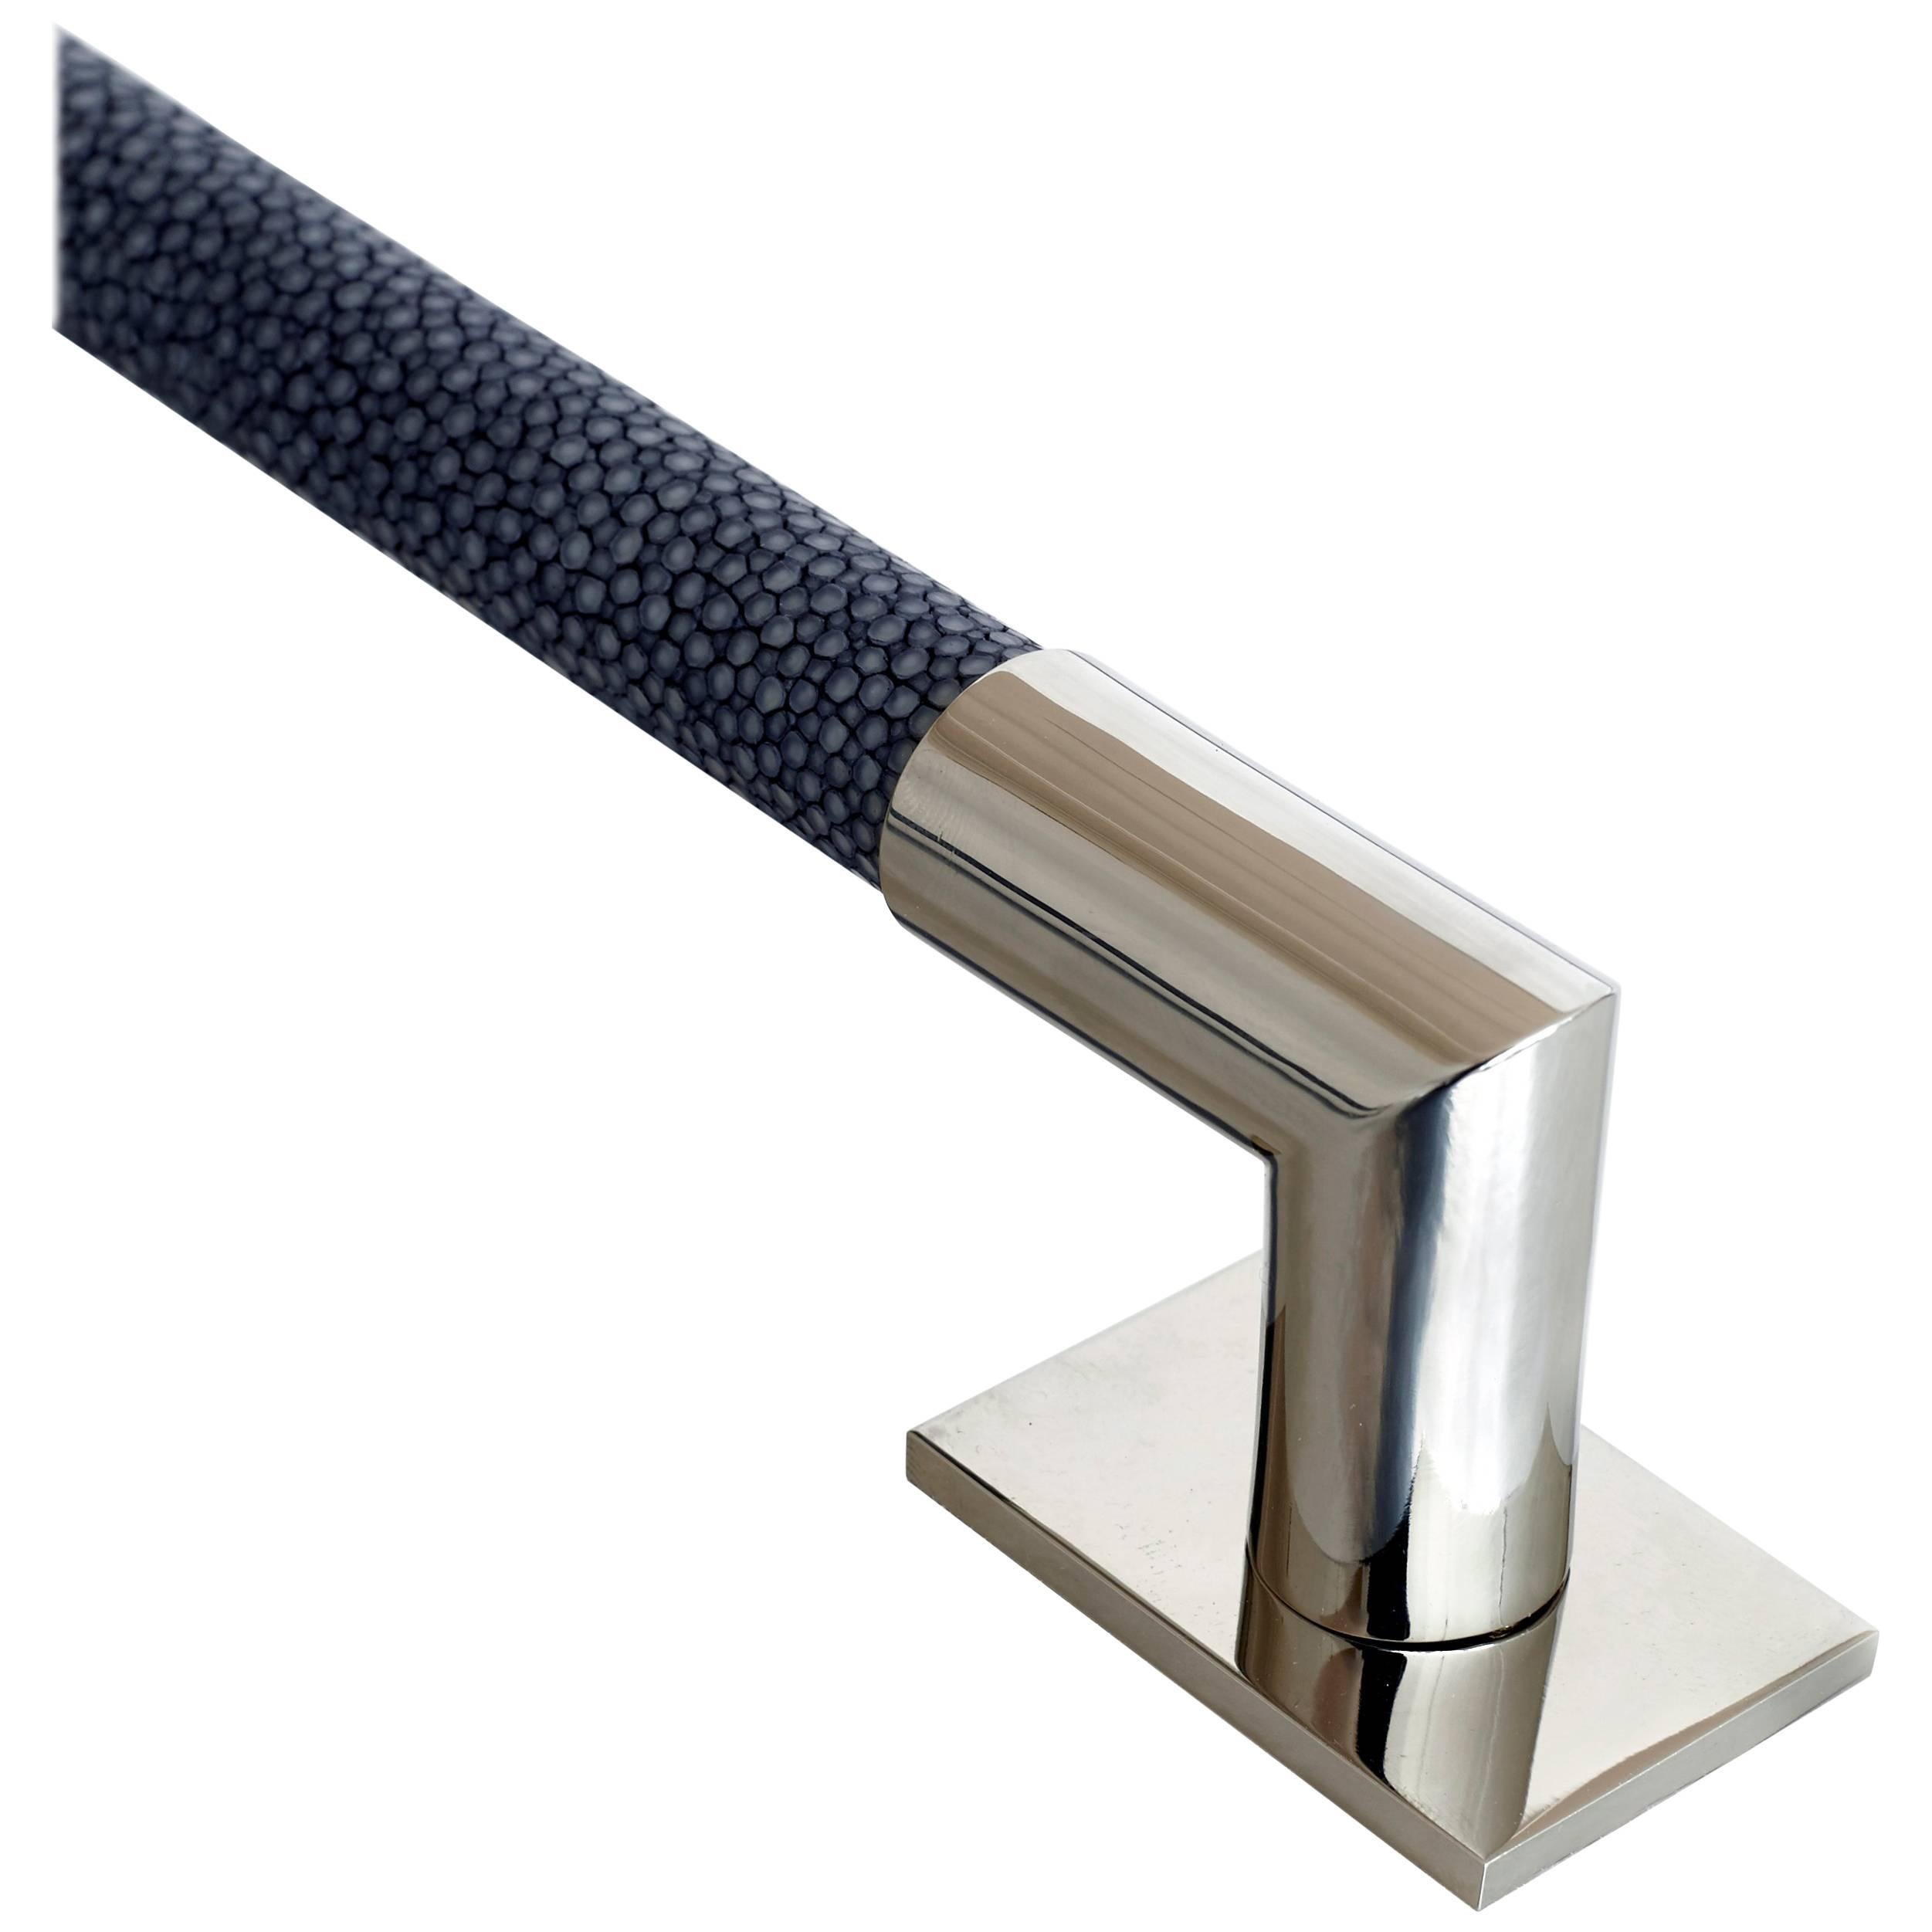 Polished nickel and hand-dyed shagreen bar cabinet pull.